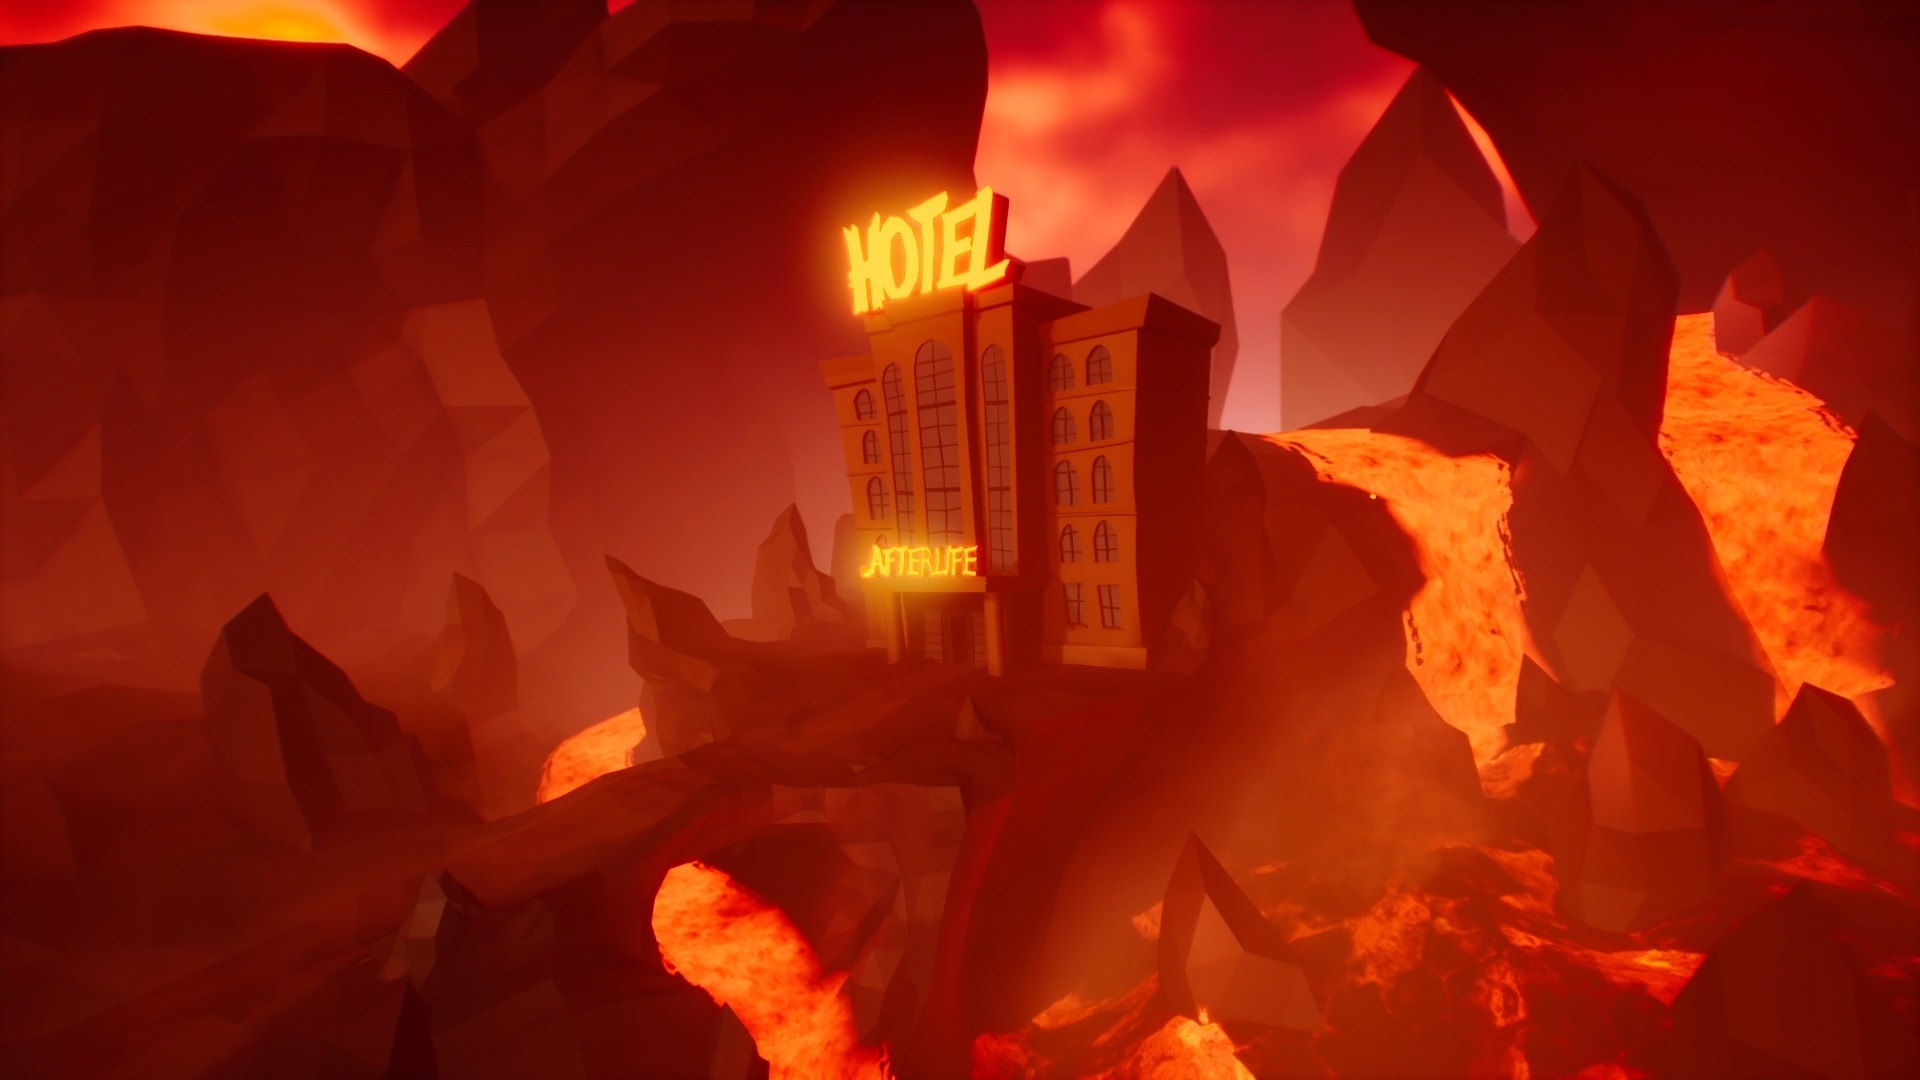 HOTEL AFTERLIFE New Economic Strategy Game Announced for PC and Consoles